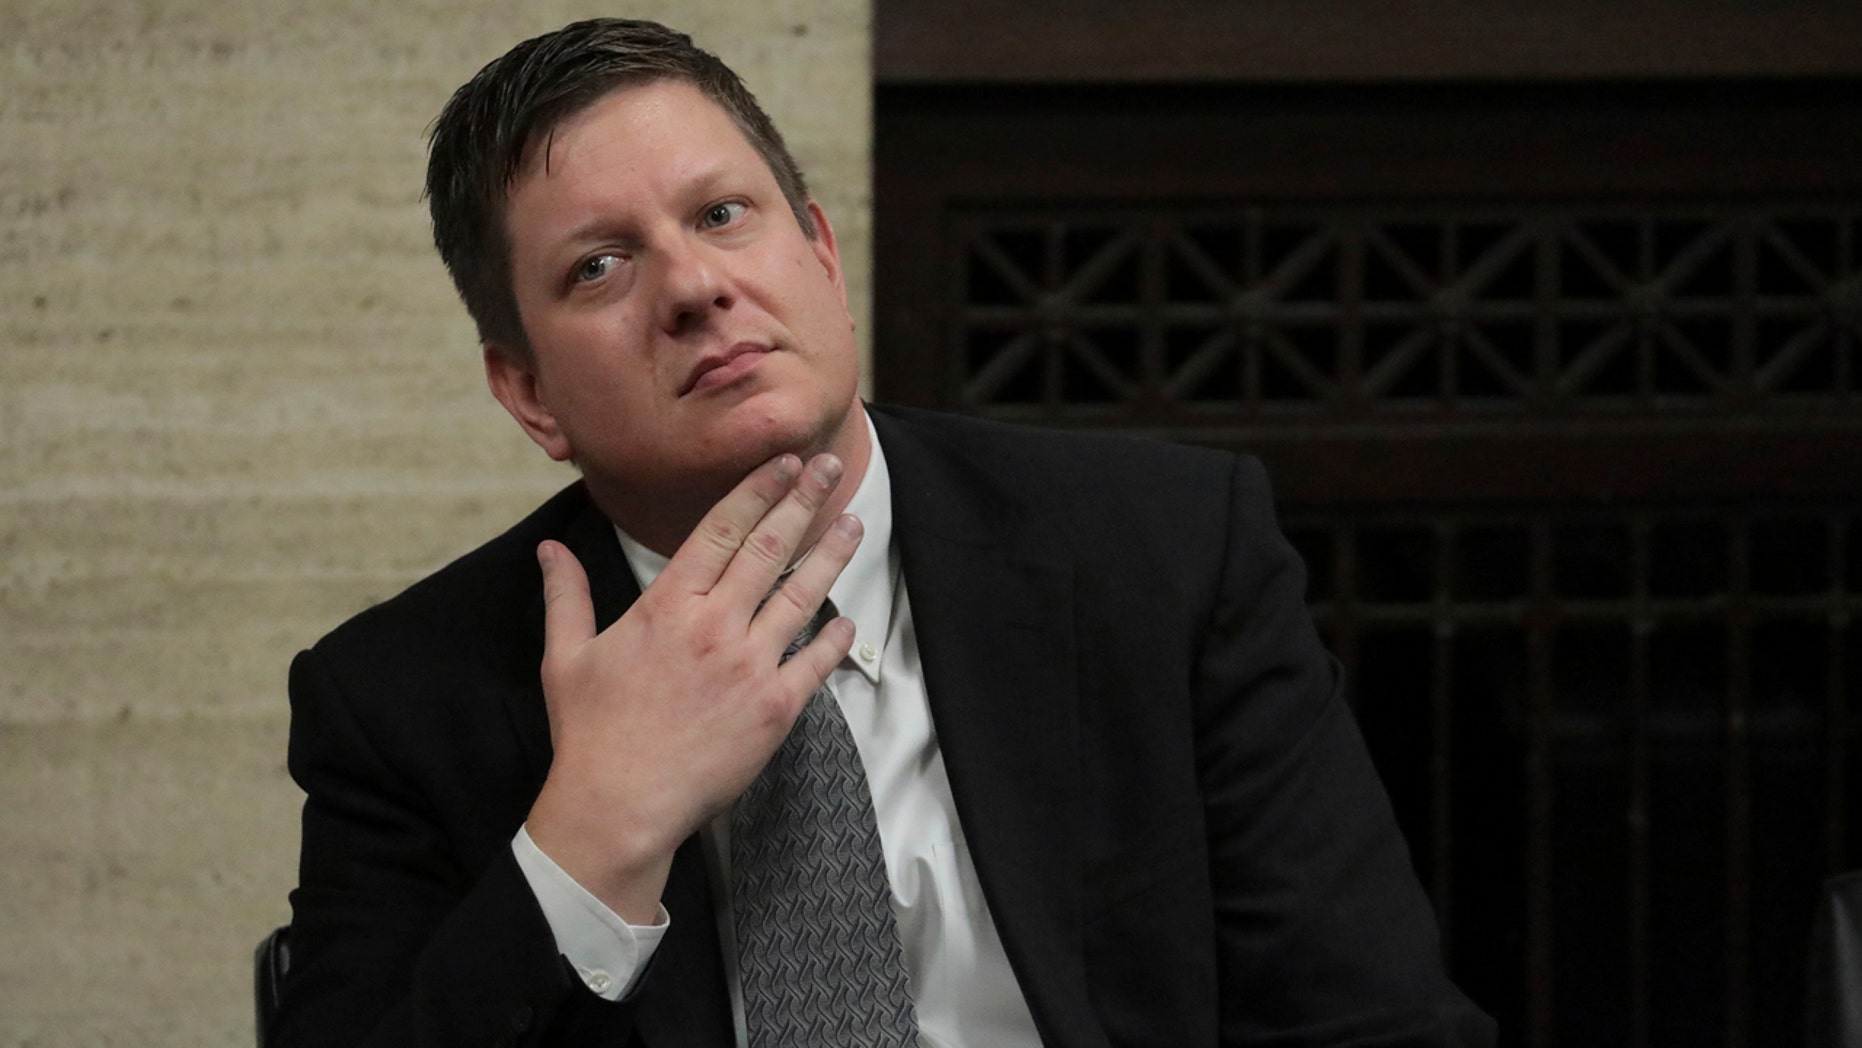 Chicago police officer Jason Van Dyke listens while lawyers appear in front of the judges' bench in front of Judge Vincent Gaughan's headquarters at the Leighton Criminal Court Building in Chicago on October 5, 2018.